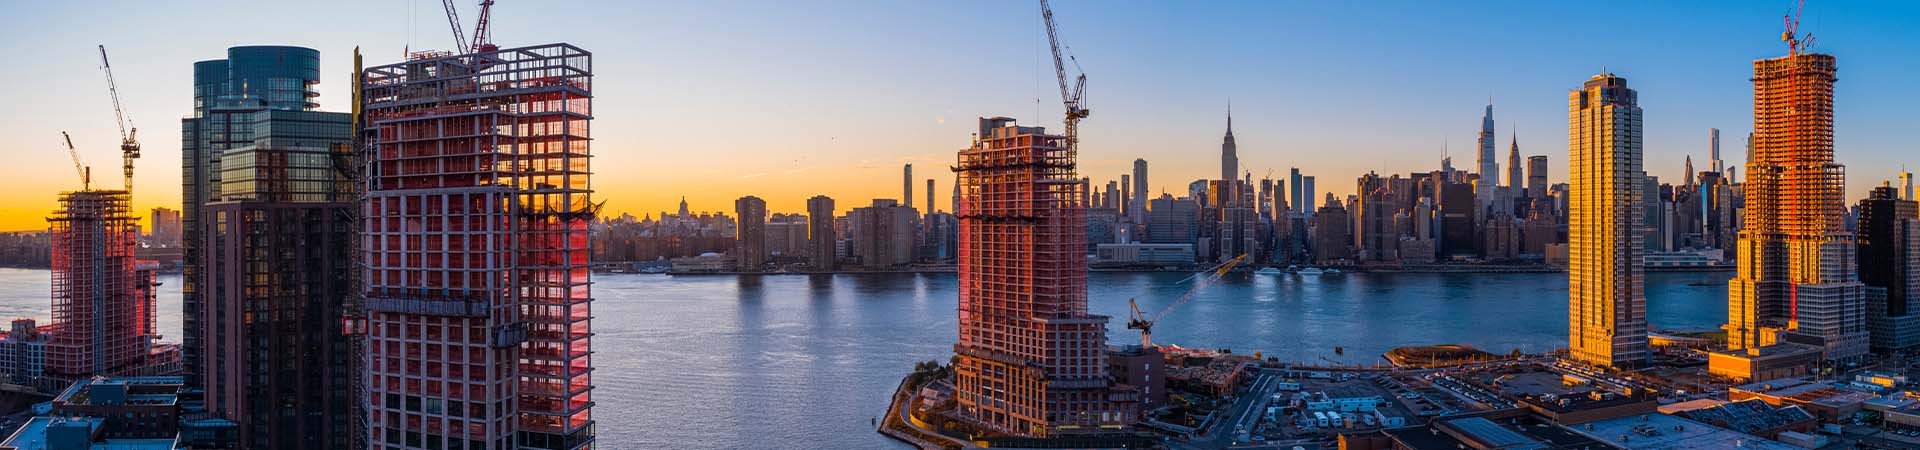 tall buildings and construction cranes beside a city river at sunset